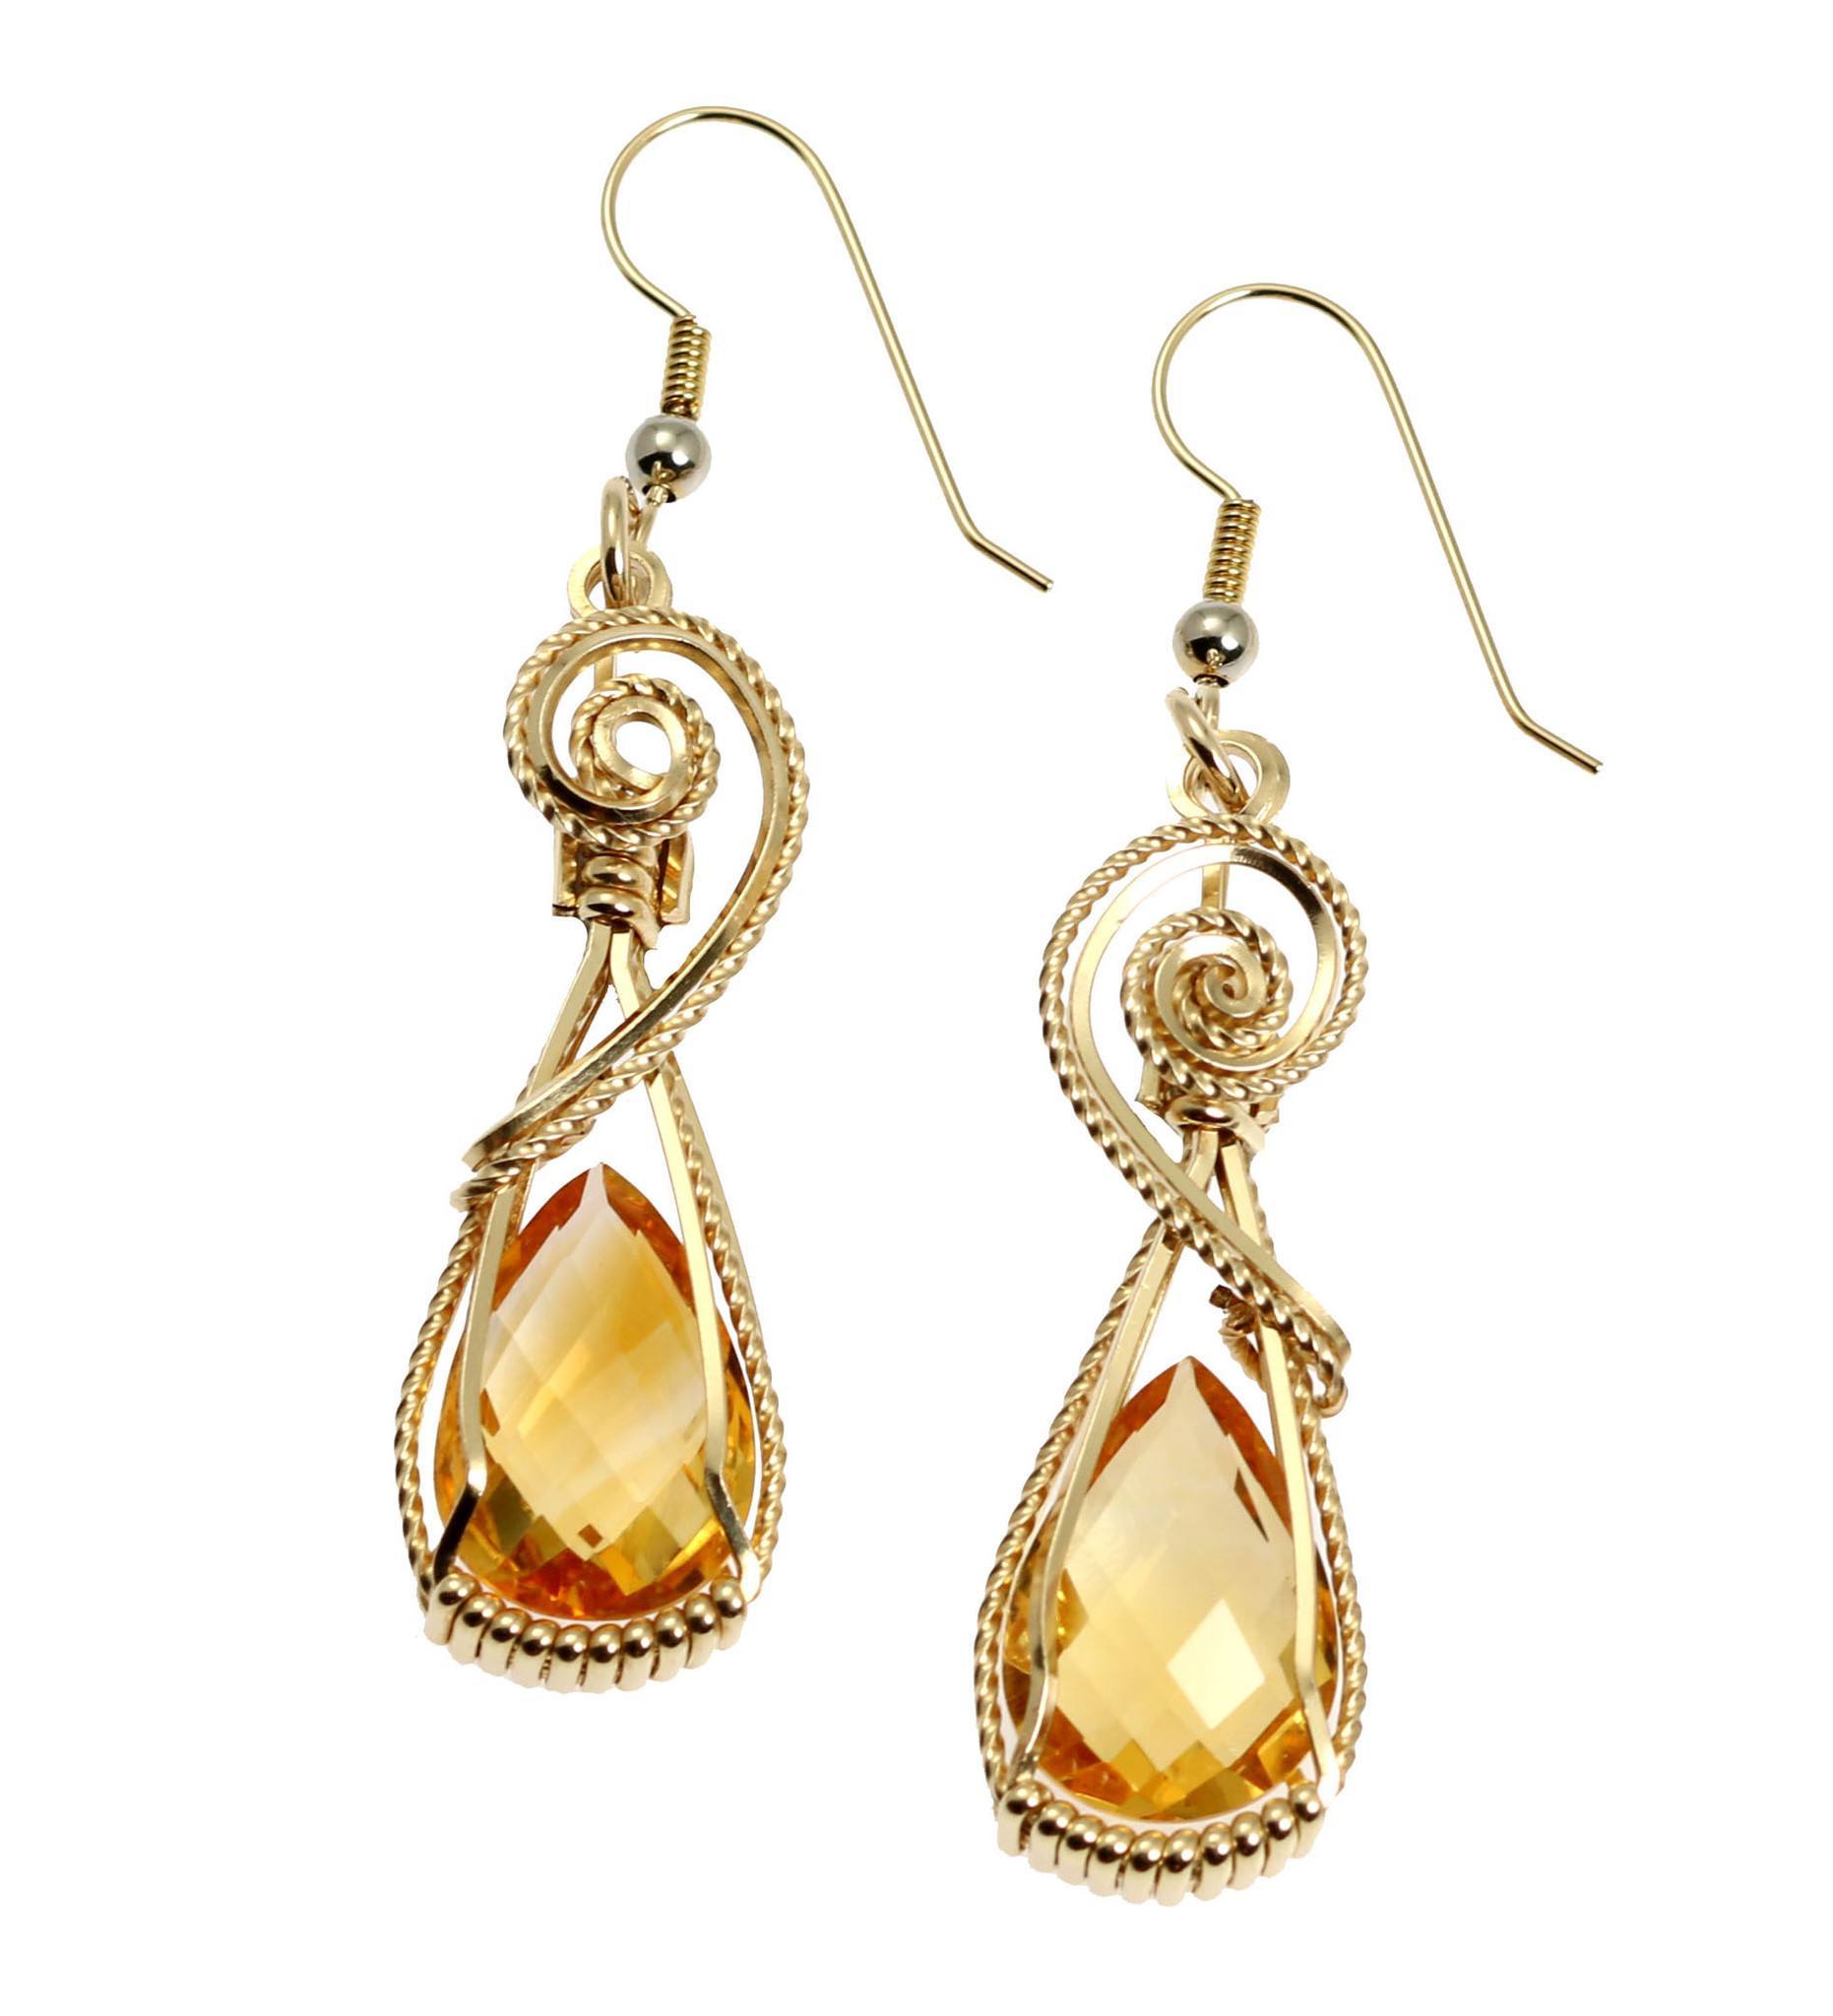 21 CT Checkerboard Cut Citrine 14K Gold-filled Earrings